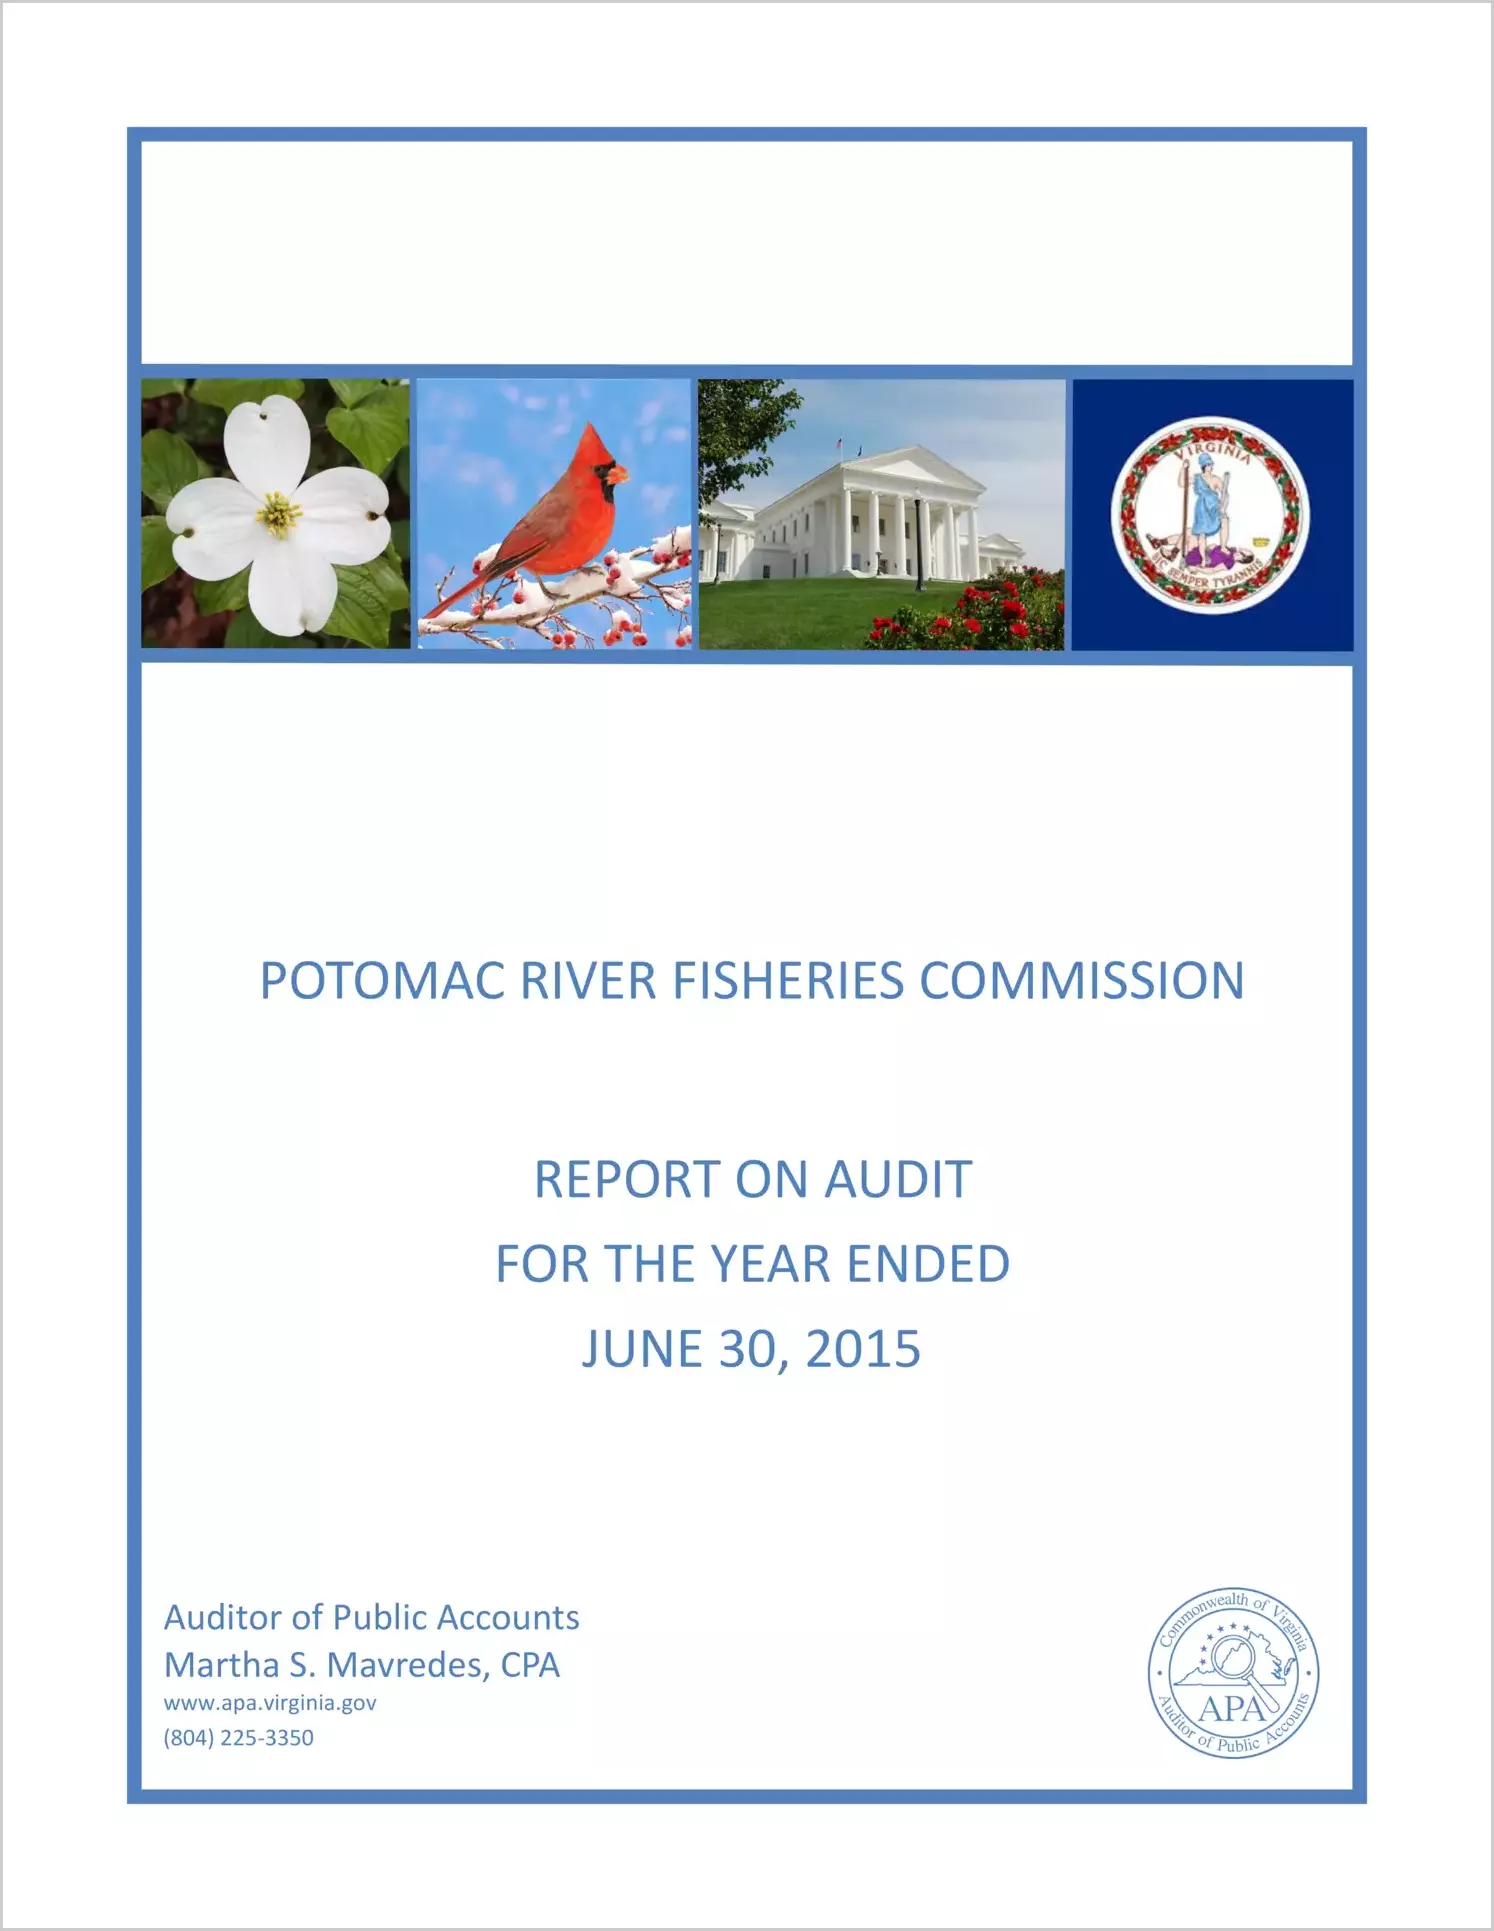 Potomac River Fisheries Commission report on audit for the year ended June 30, 2015